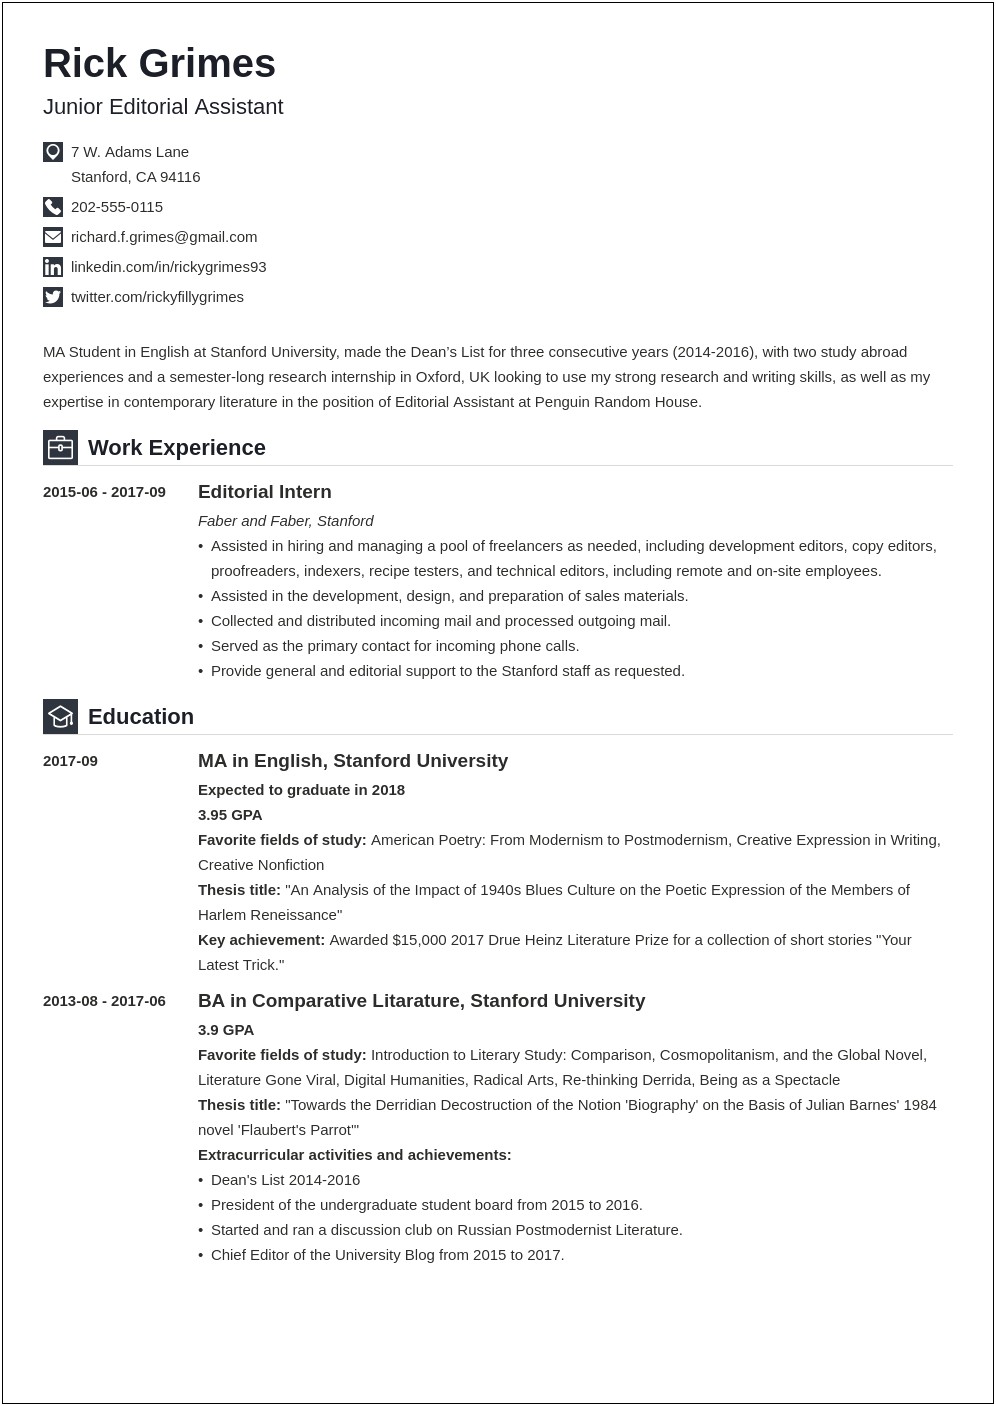 Resume Objective Statement Example Entry Level